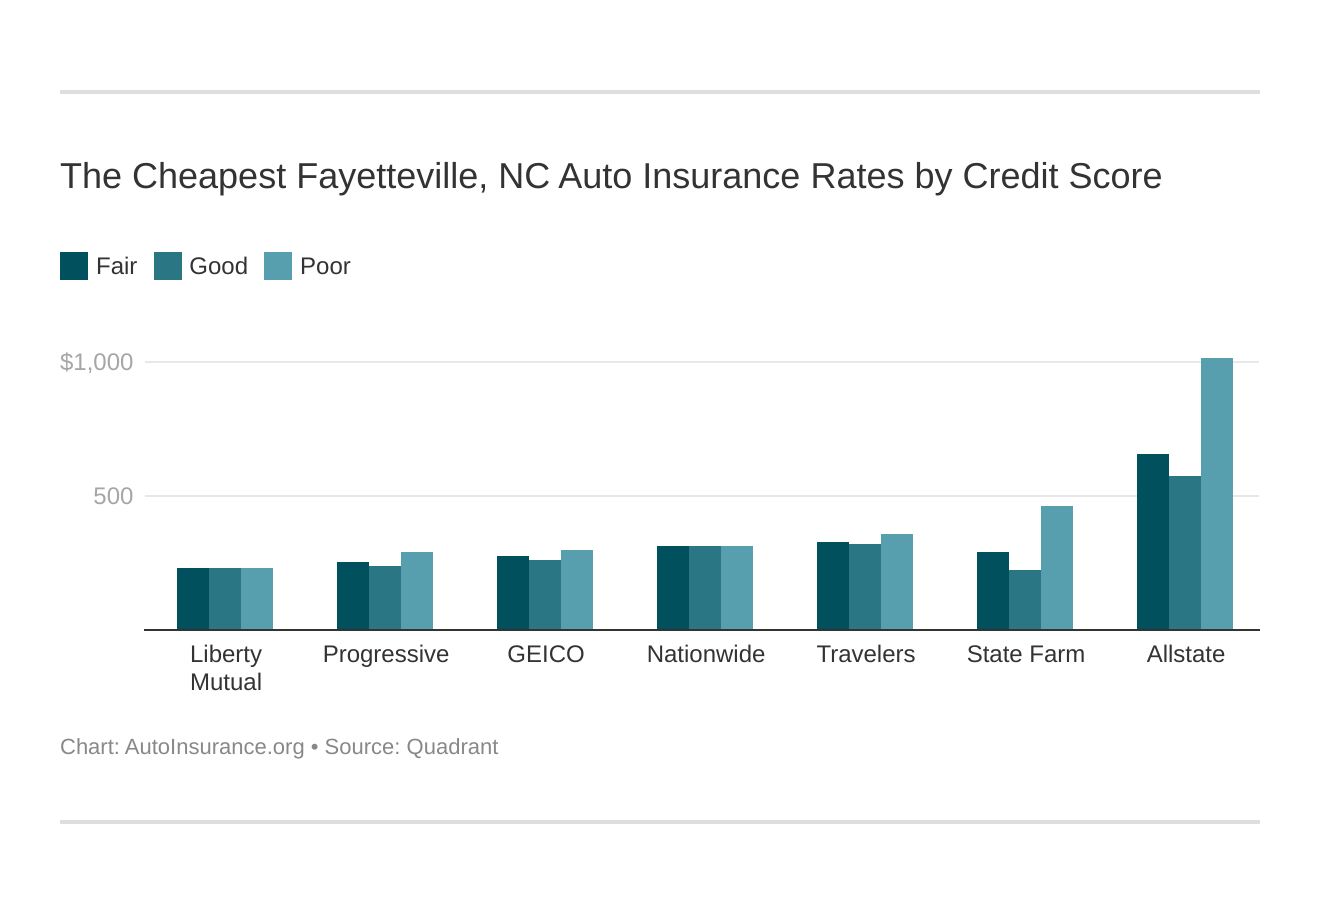 The Cheapest Fayetteville, NC Auto Insurance Rates by Credit Score